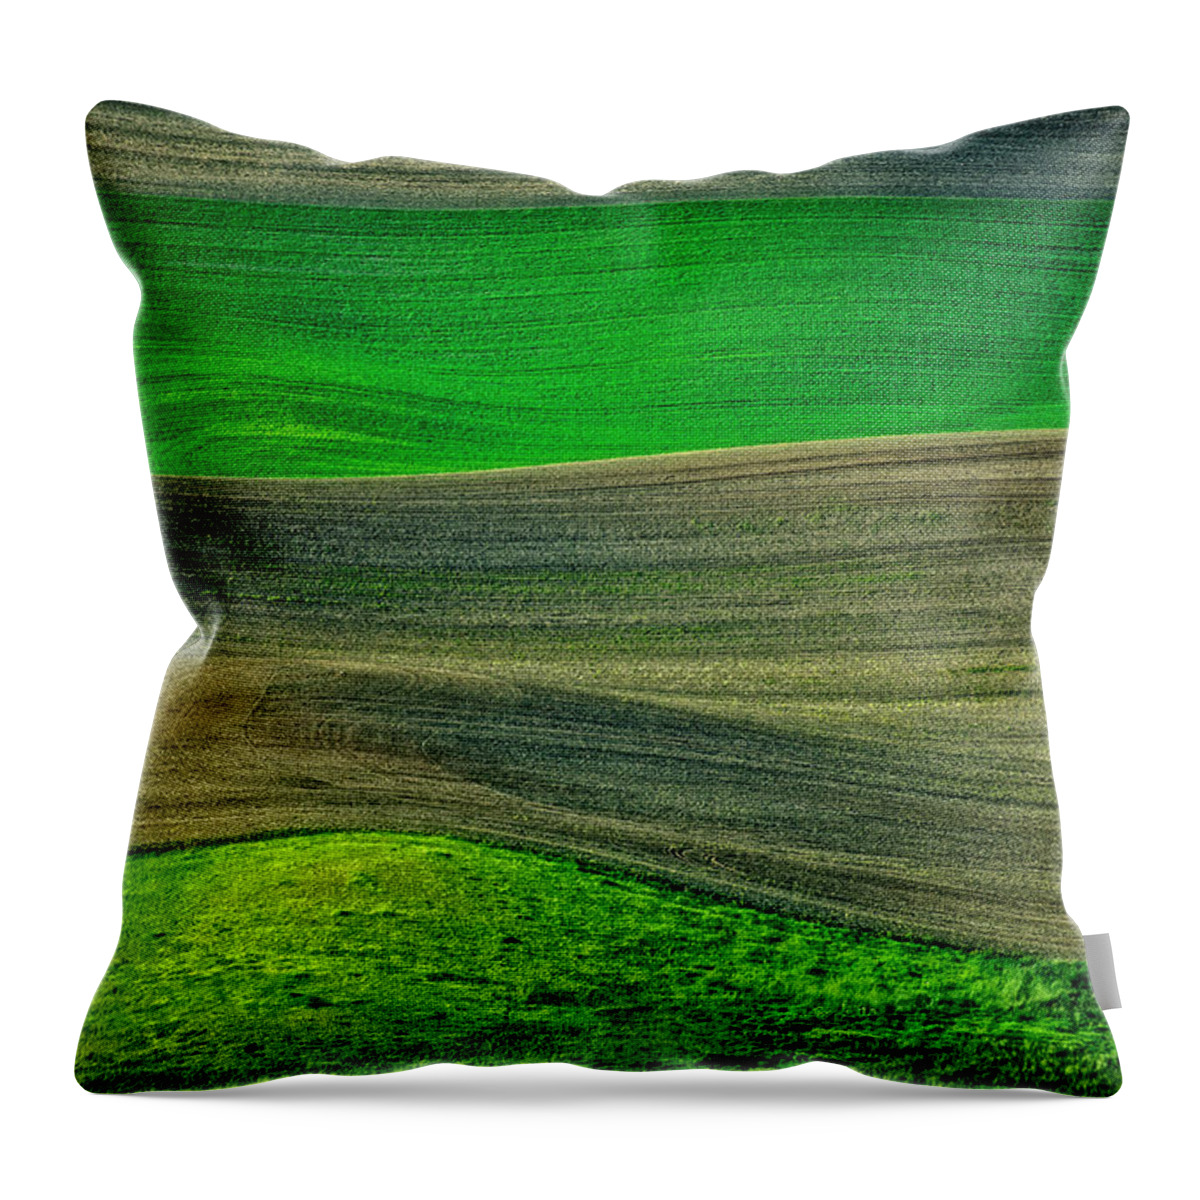 Palouse Throw Pillow featuring the photograph Palouse Textures Two by Ed Broberg